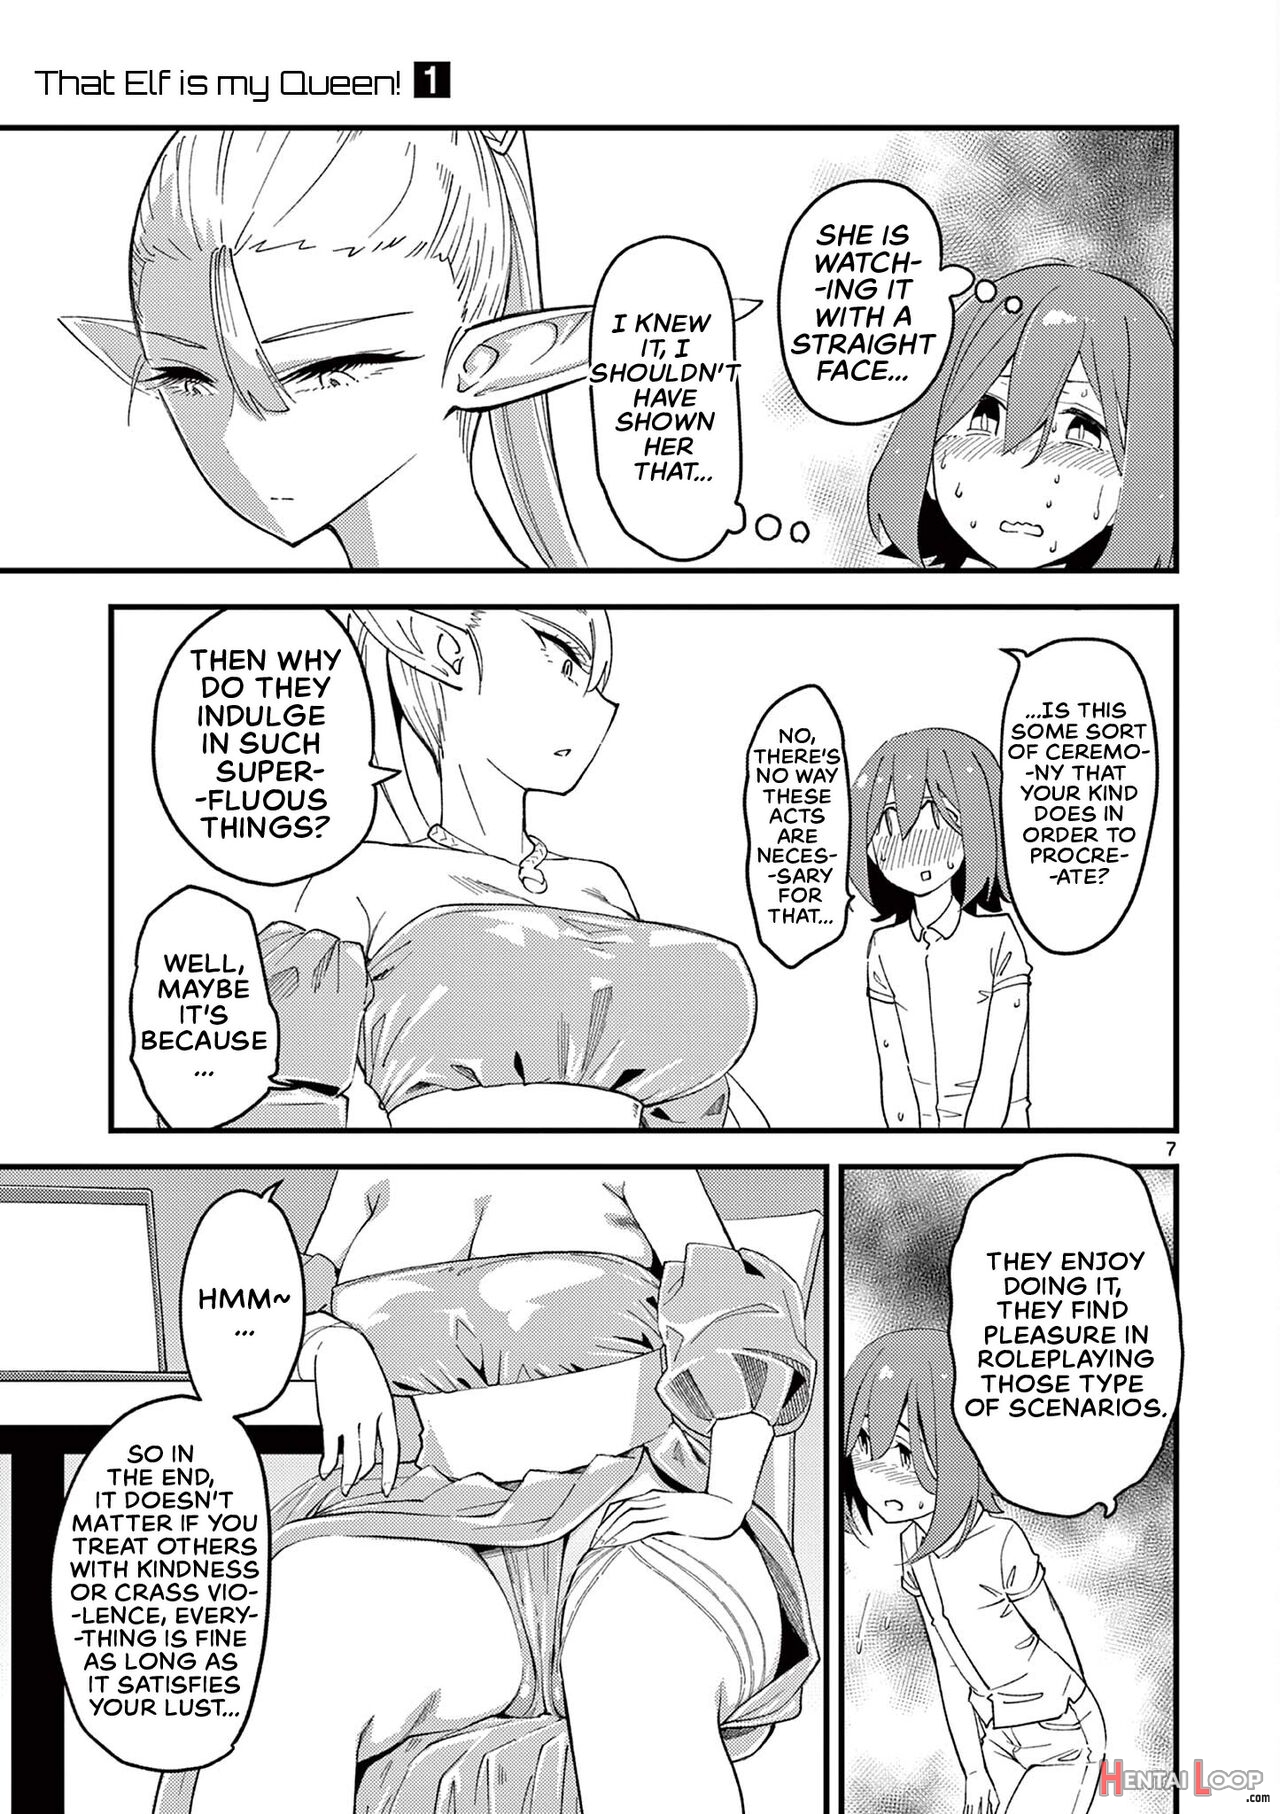 That Elf Is My Queen! Ch. 2 Vol.1 page 7